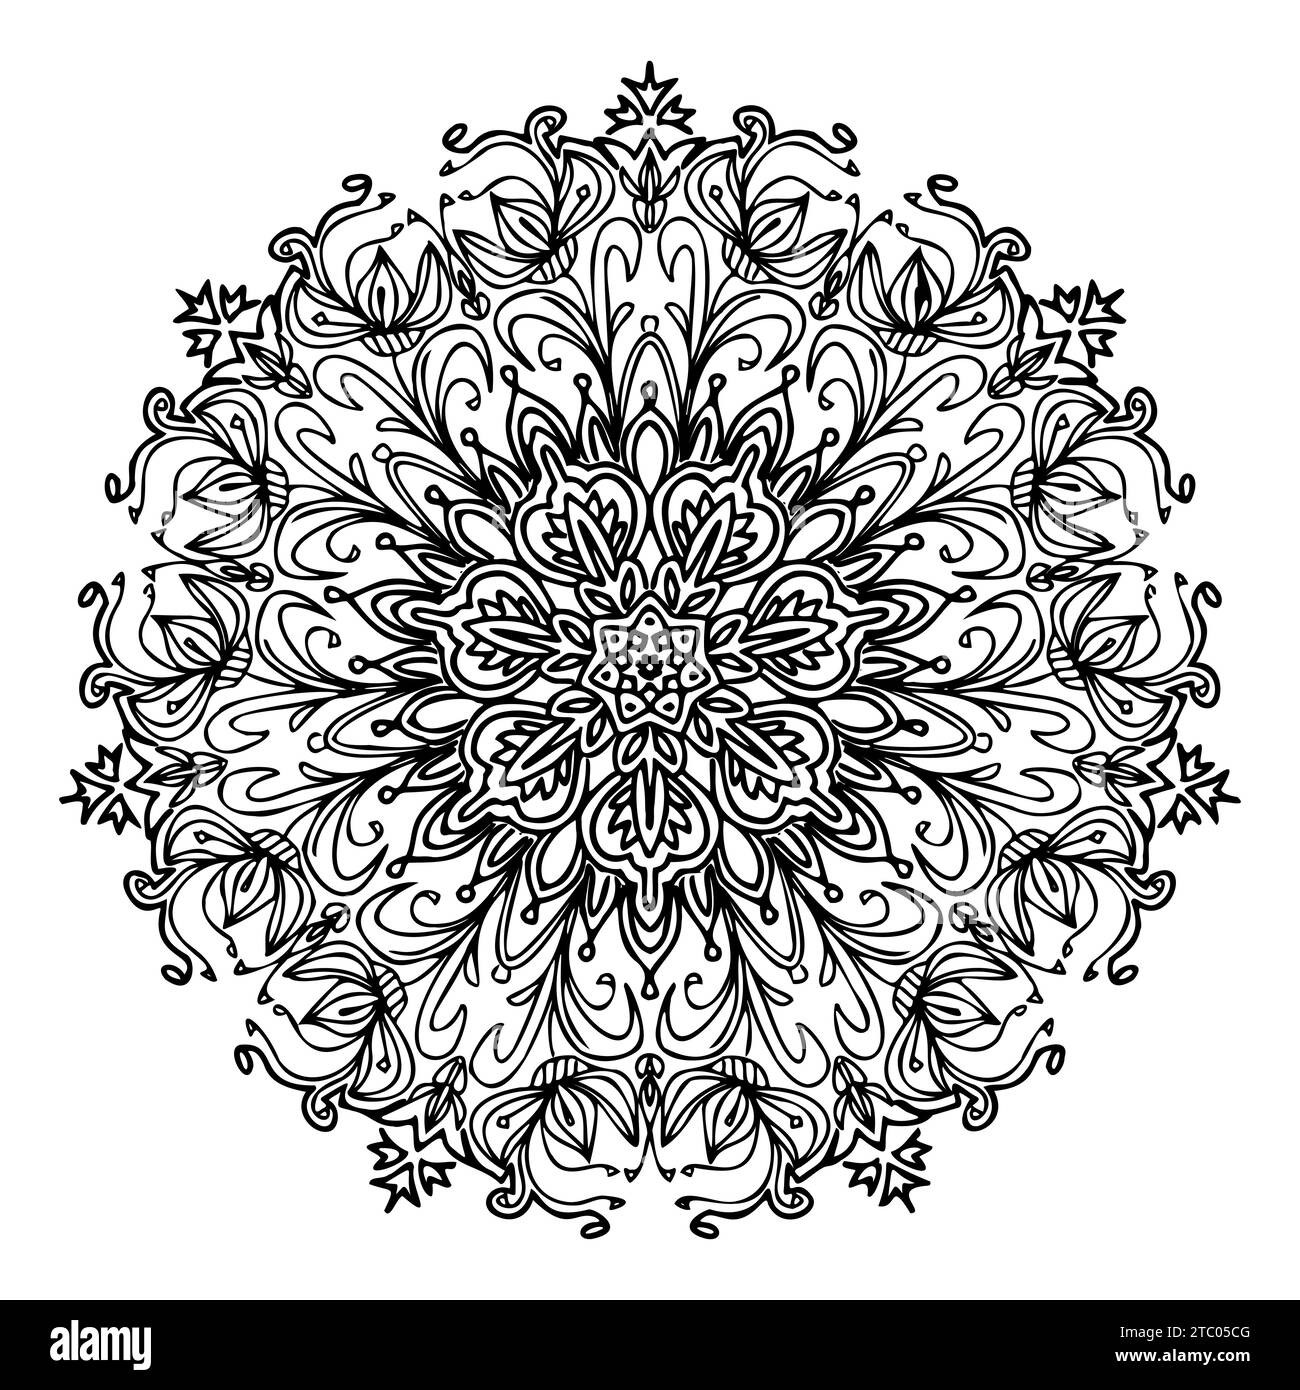 Mandala spirit ornamental round lace ornament for coloring page design. Vector abstract circle pattern, isolate on white background. Stock Vector